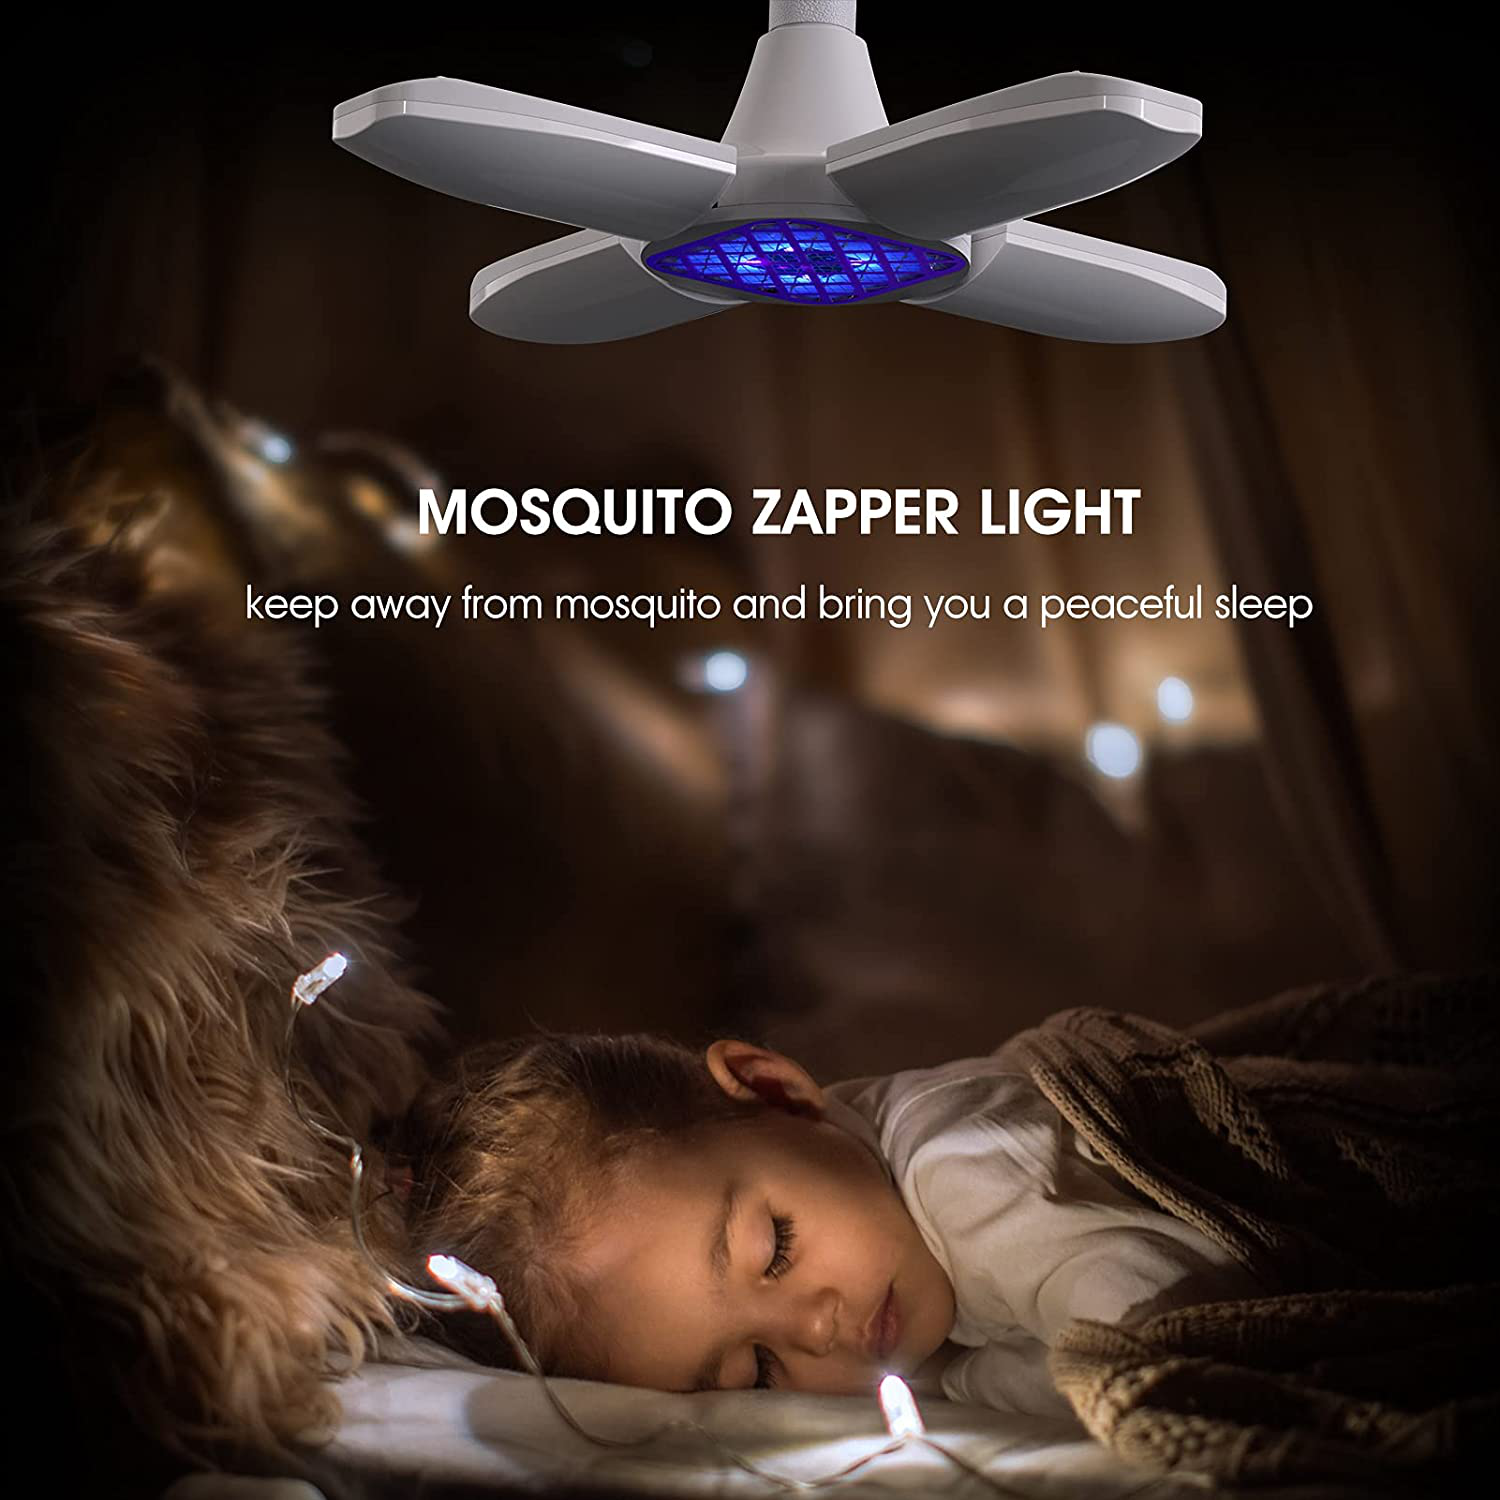 imirror Bug Zapper Light Bulb, 2 in 1 Mosquito Killer Lamp Electronic Insect & Fly Killer for Home Patio Backyard Garage